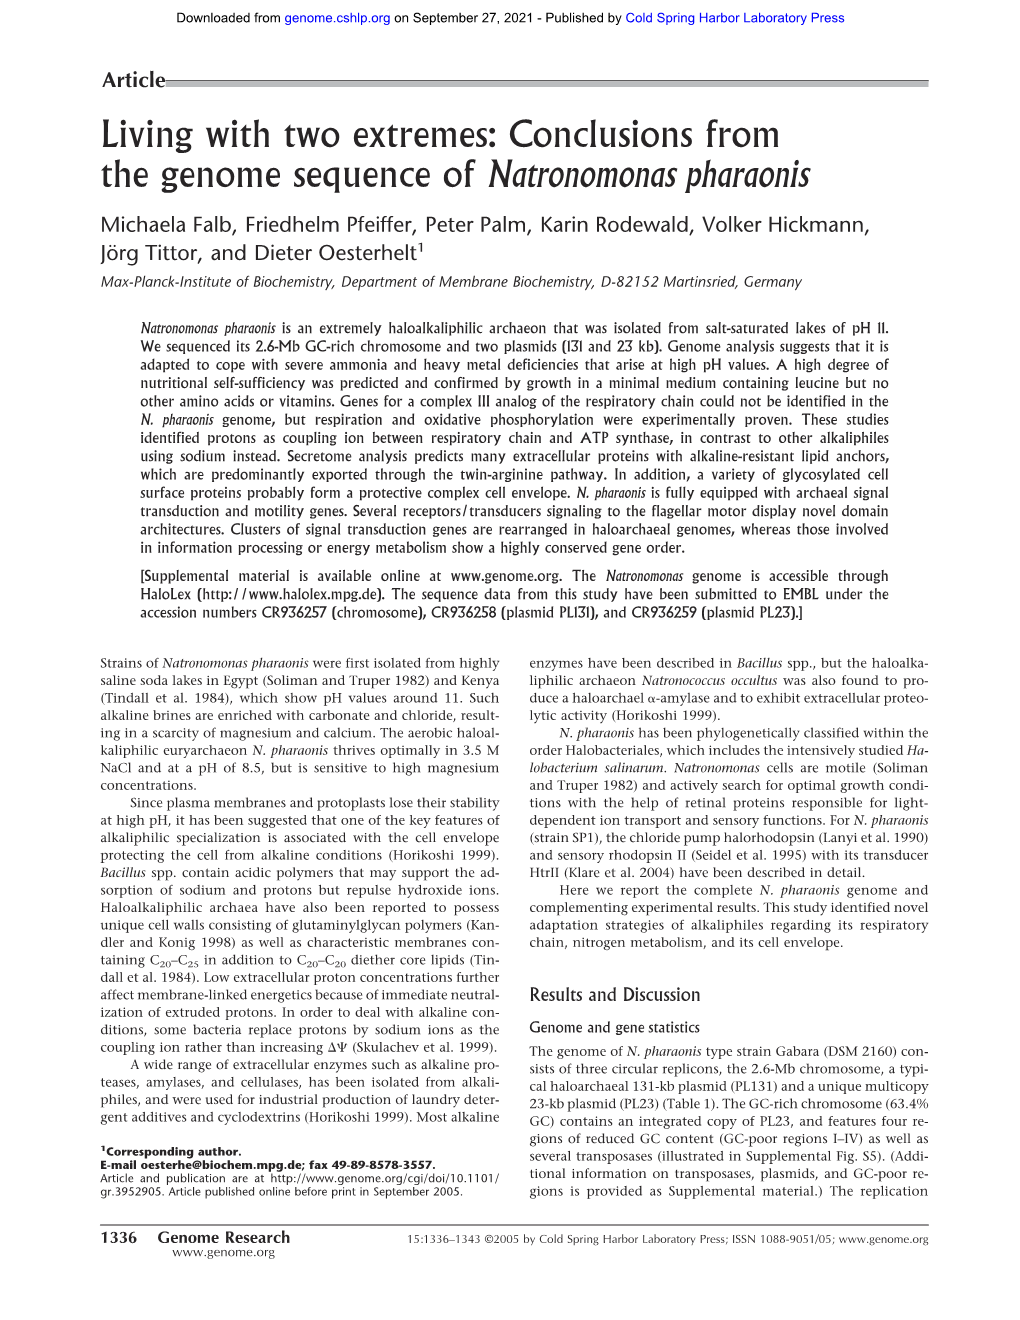 Living with Two Extremes: Conclusions from the Genome Sequence of Natronomonas Pharaonis